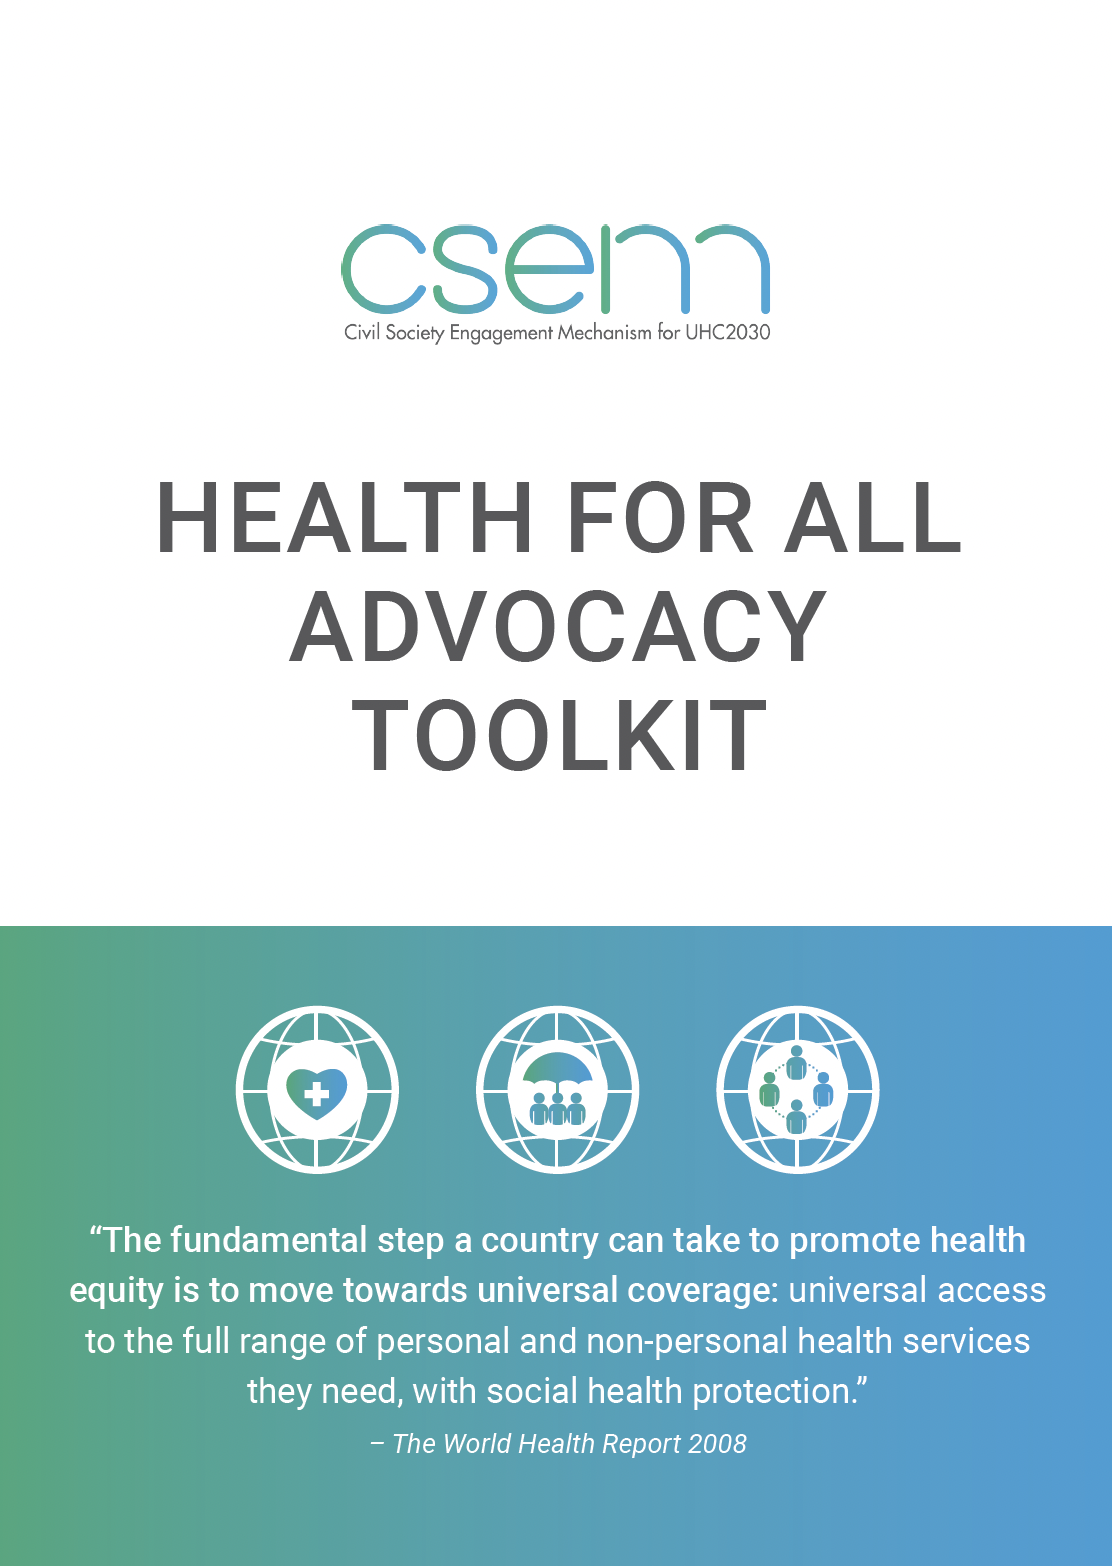 Health for All Advocacy Toolkit